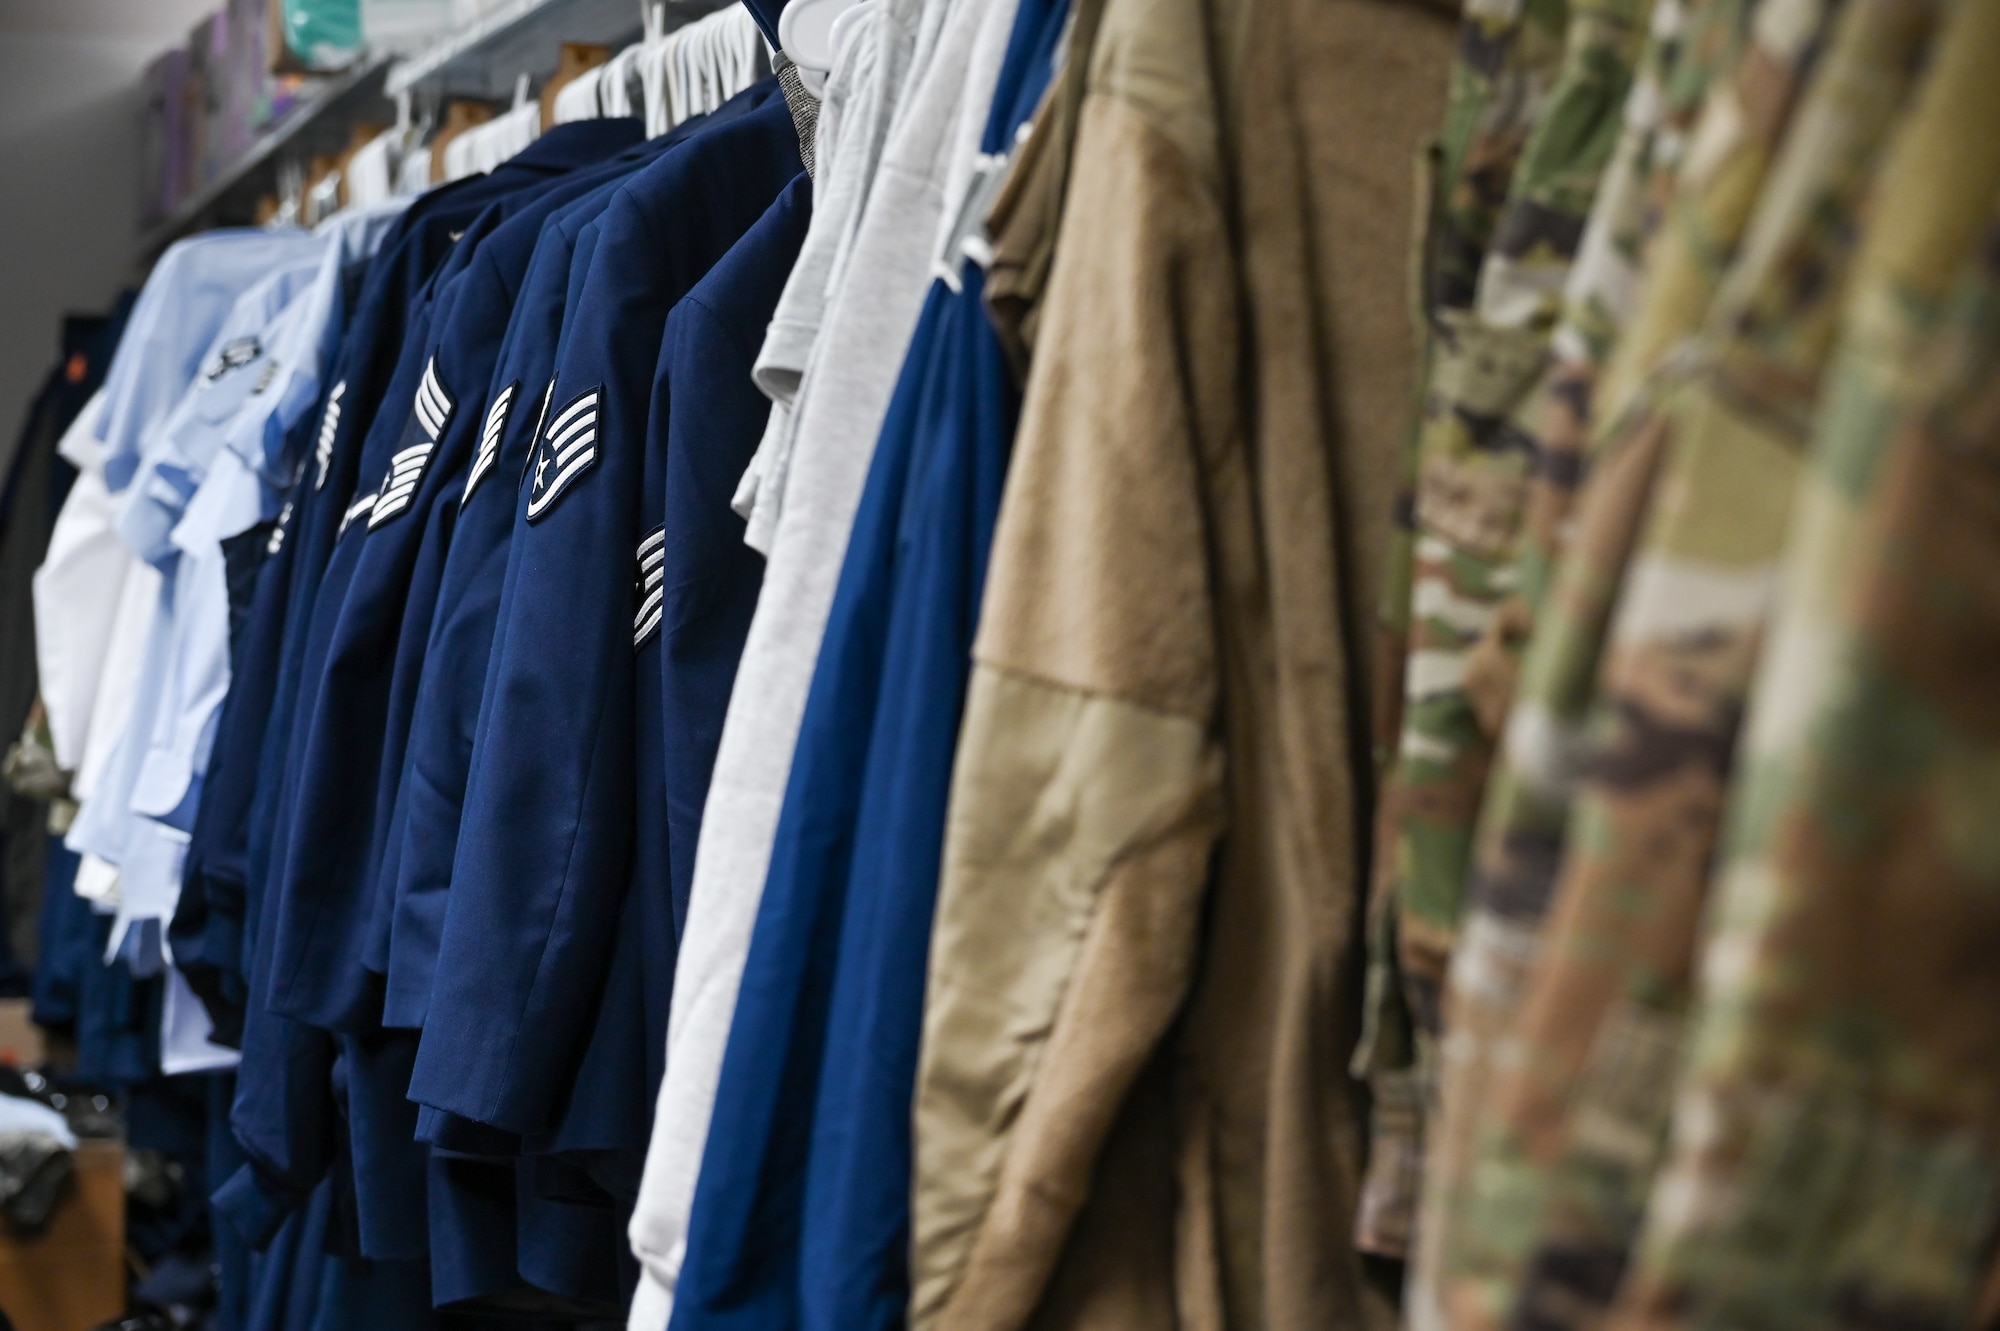 A variety of uniform items are available at the Airman's Attic at Hill Air Force Base, Utah. Airman's Attic provides free uniforms, clothing, household items and food to the military. (U.S. Air Force photo by Cynthia Griggs)